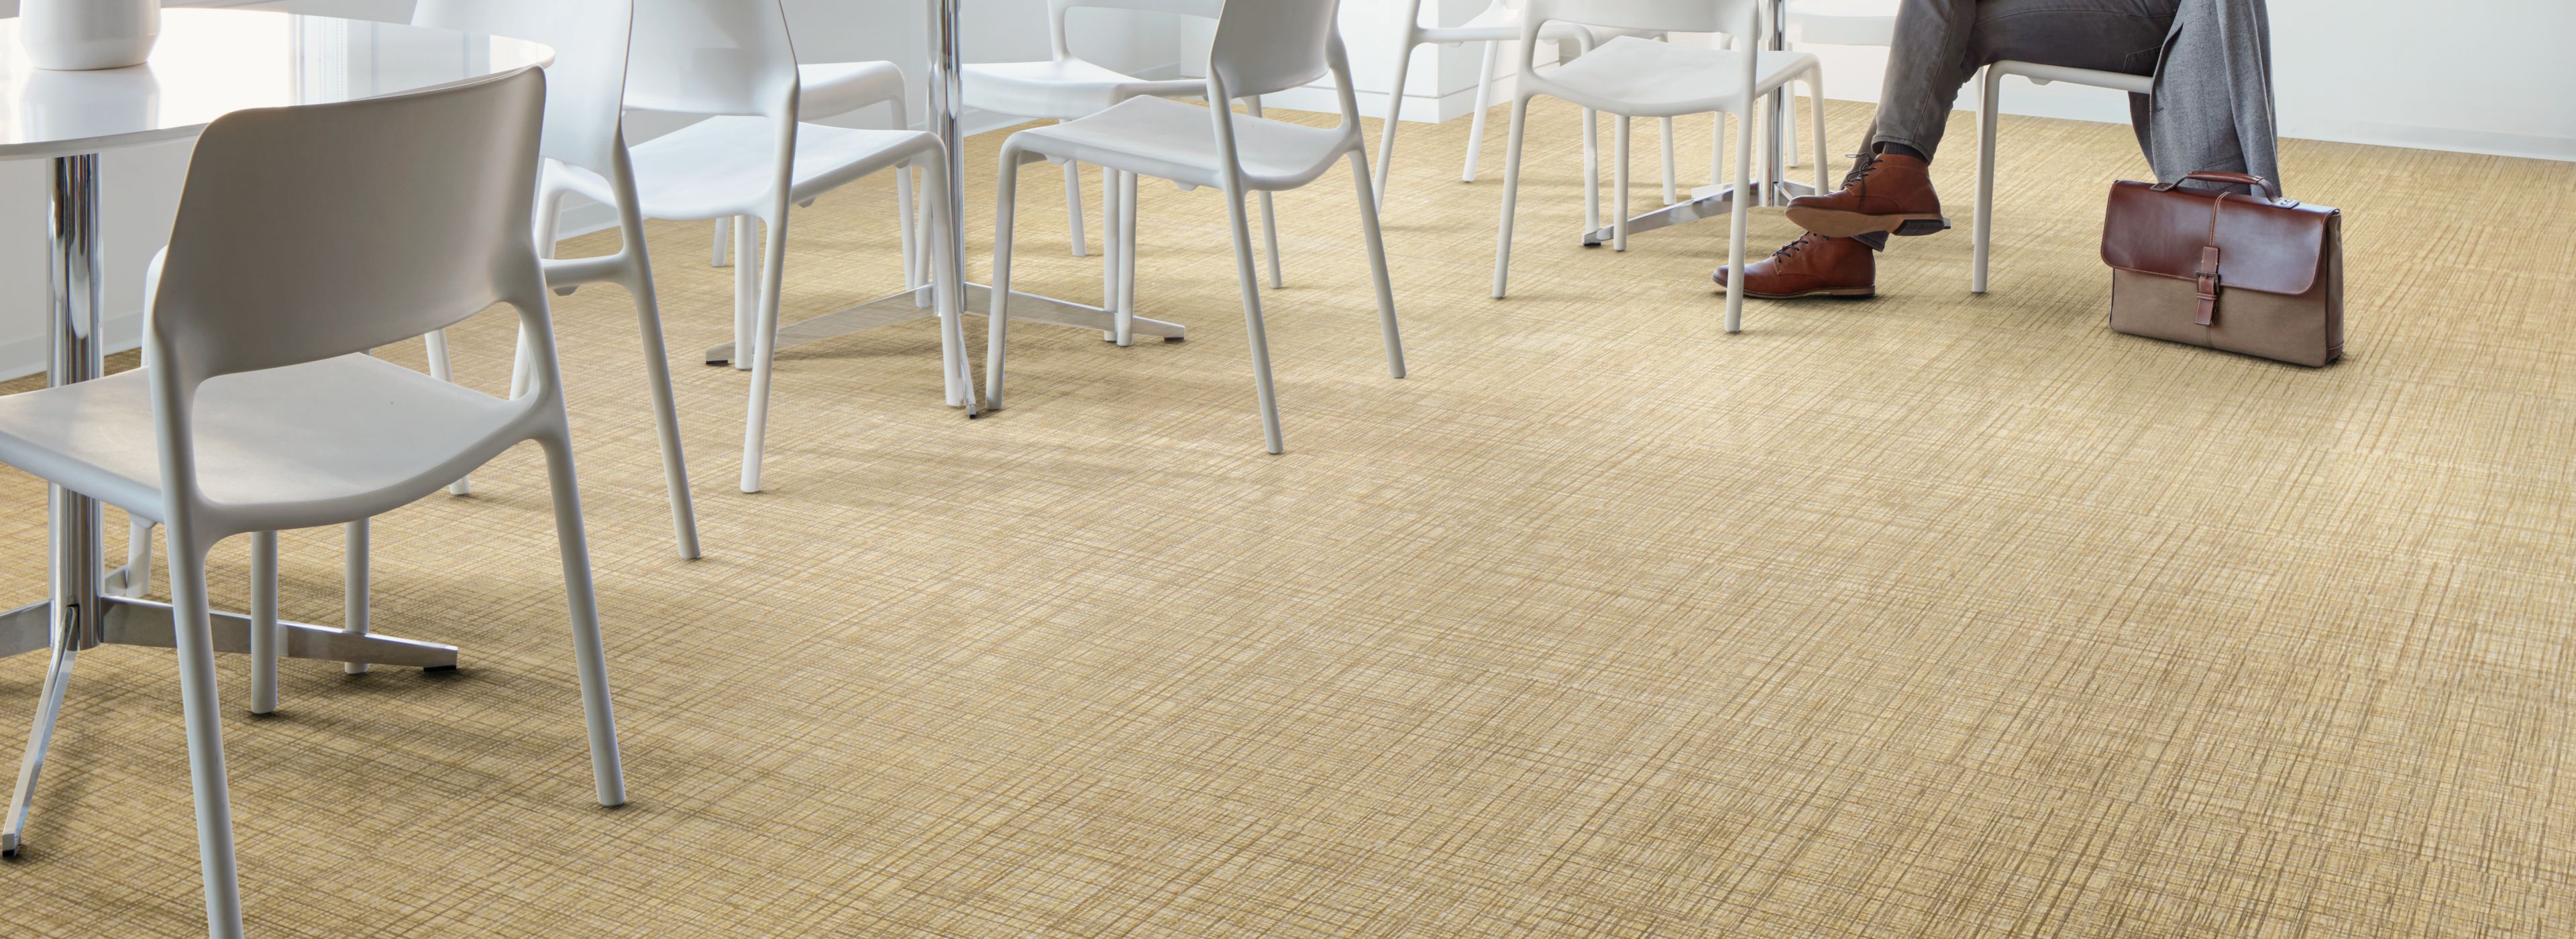 Interface Native Fabric LVT in office common area with tables and chairs Bildnummer 1